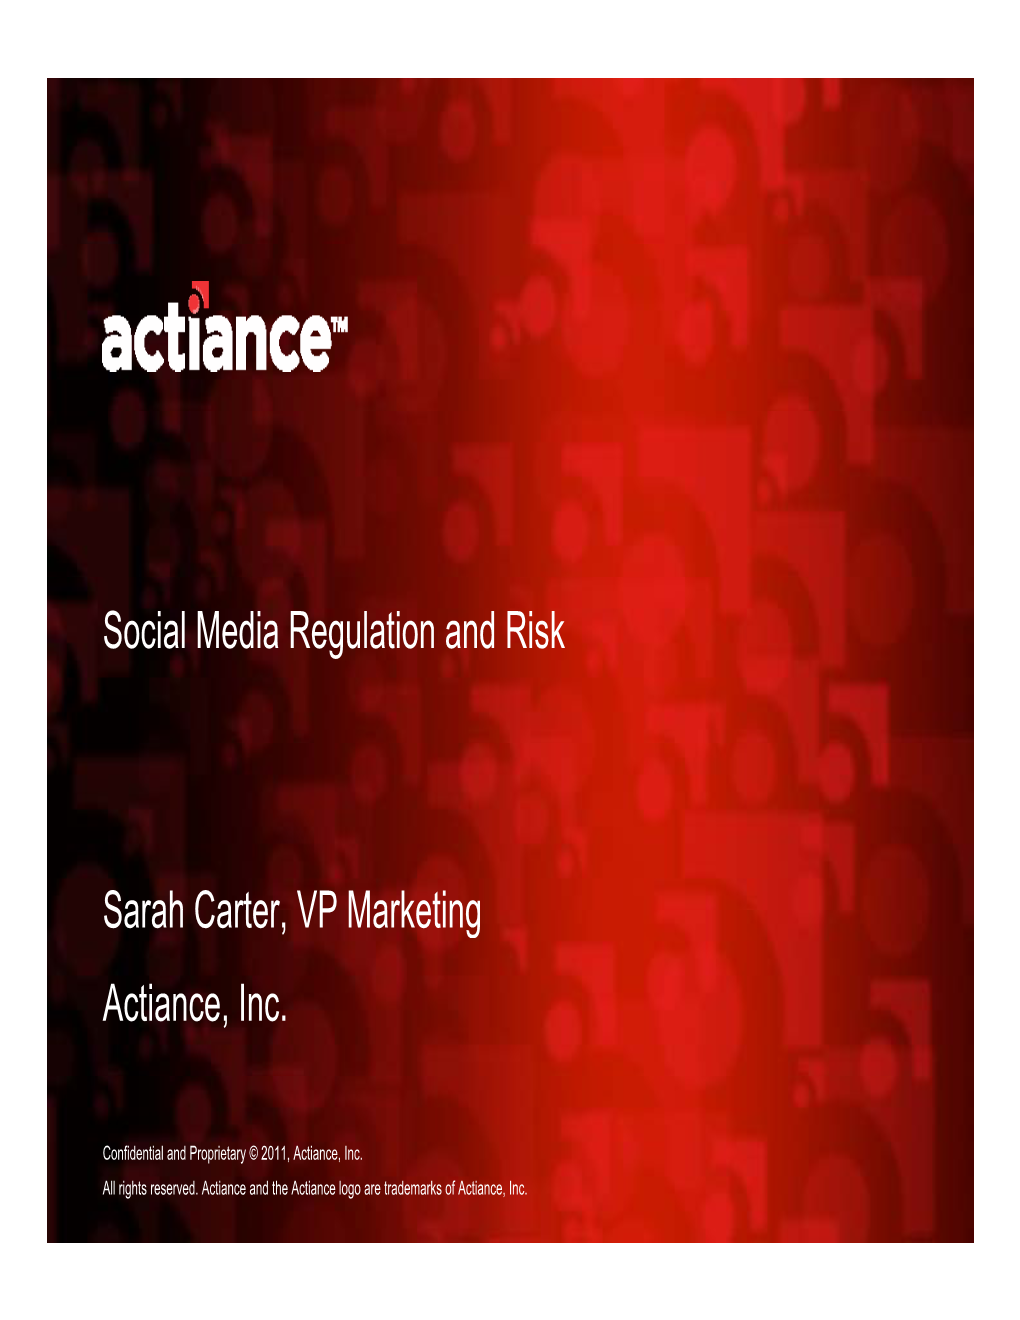 About Actiance